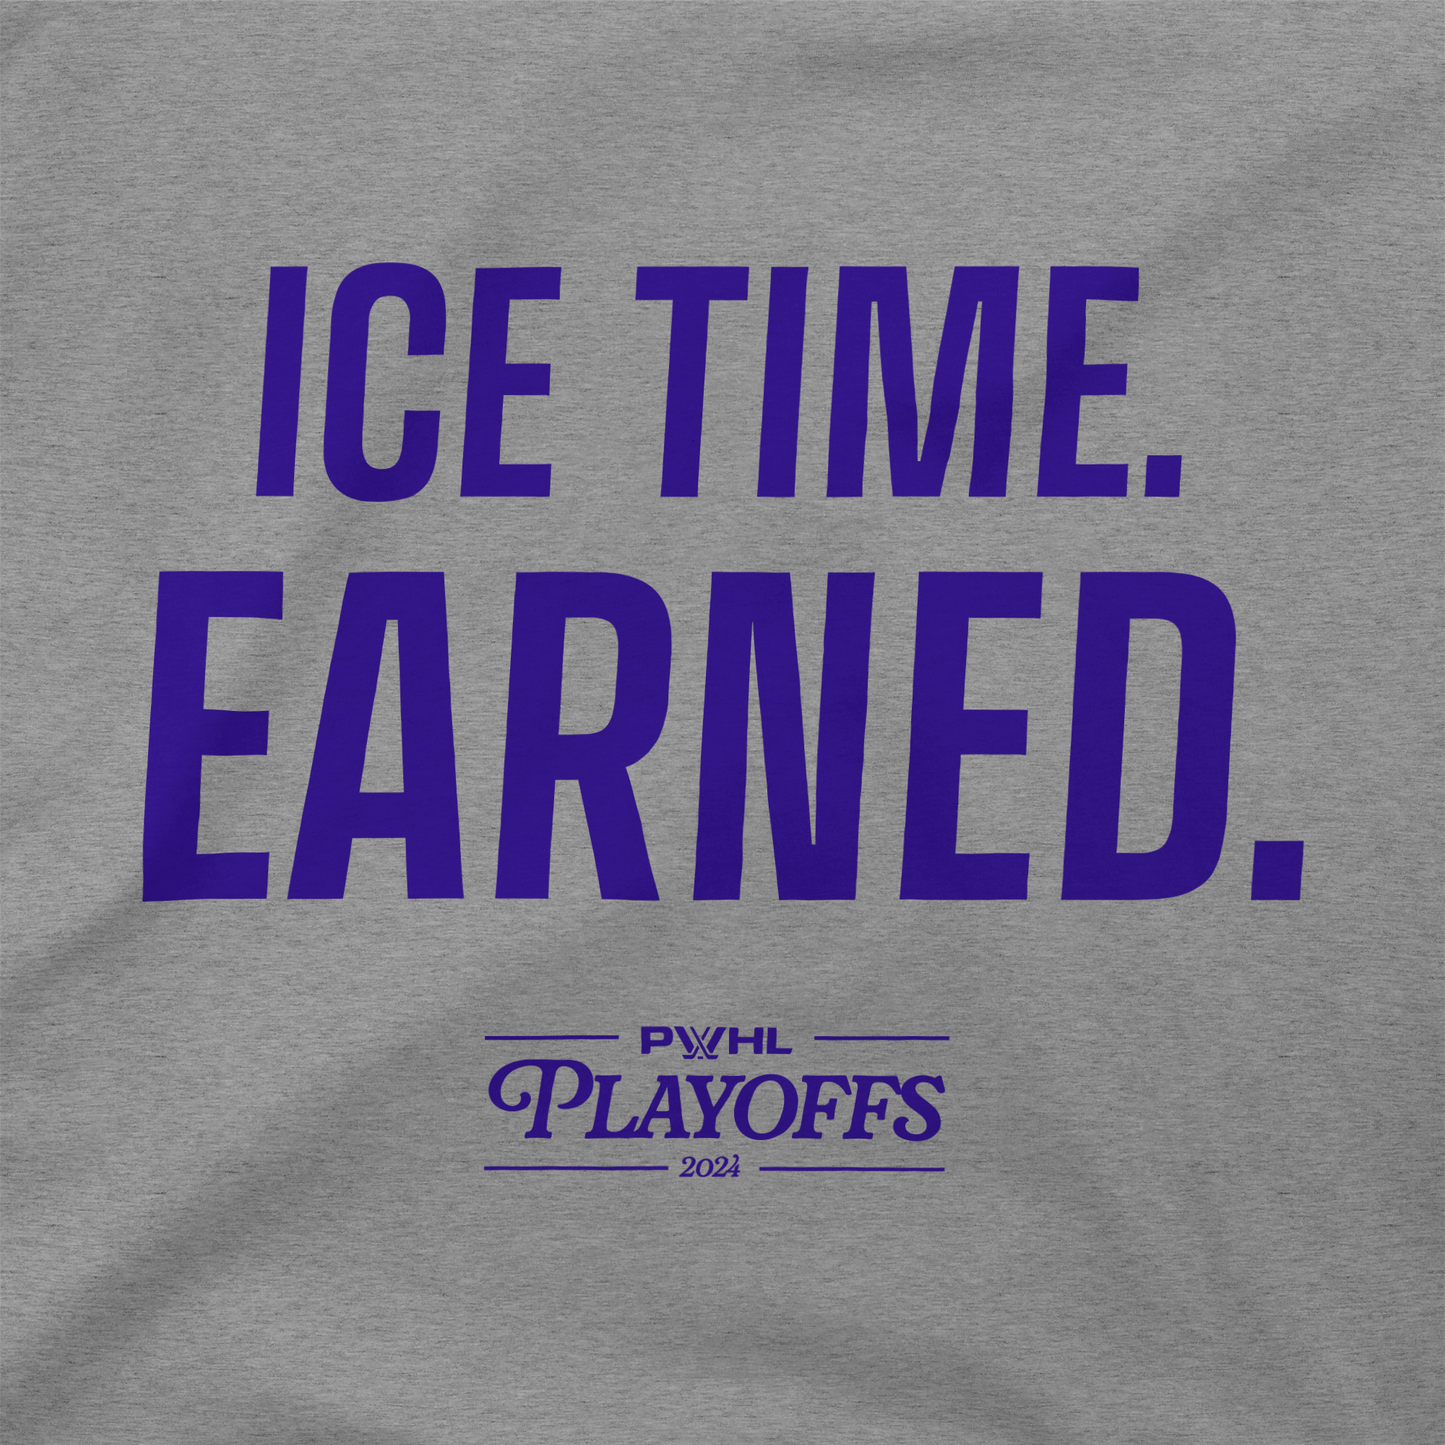 PWHL Playoffs Ice Time Earned T-Shirt